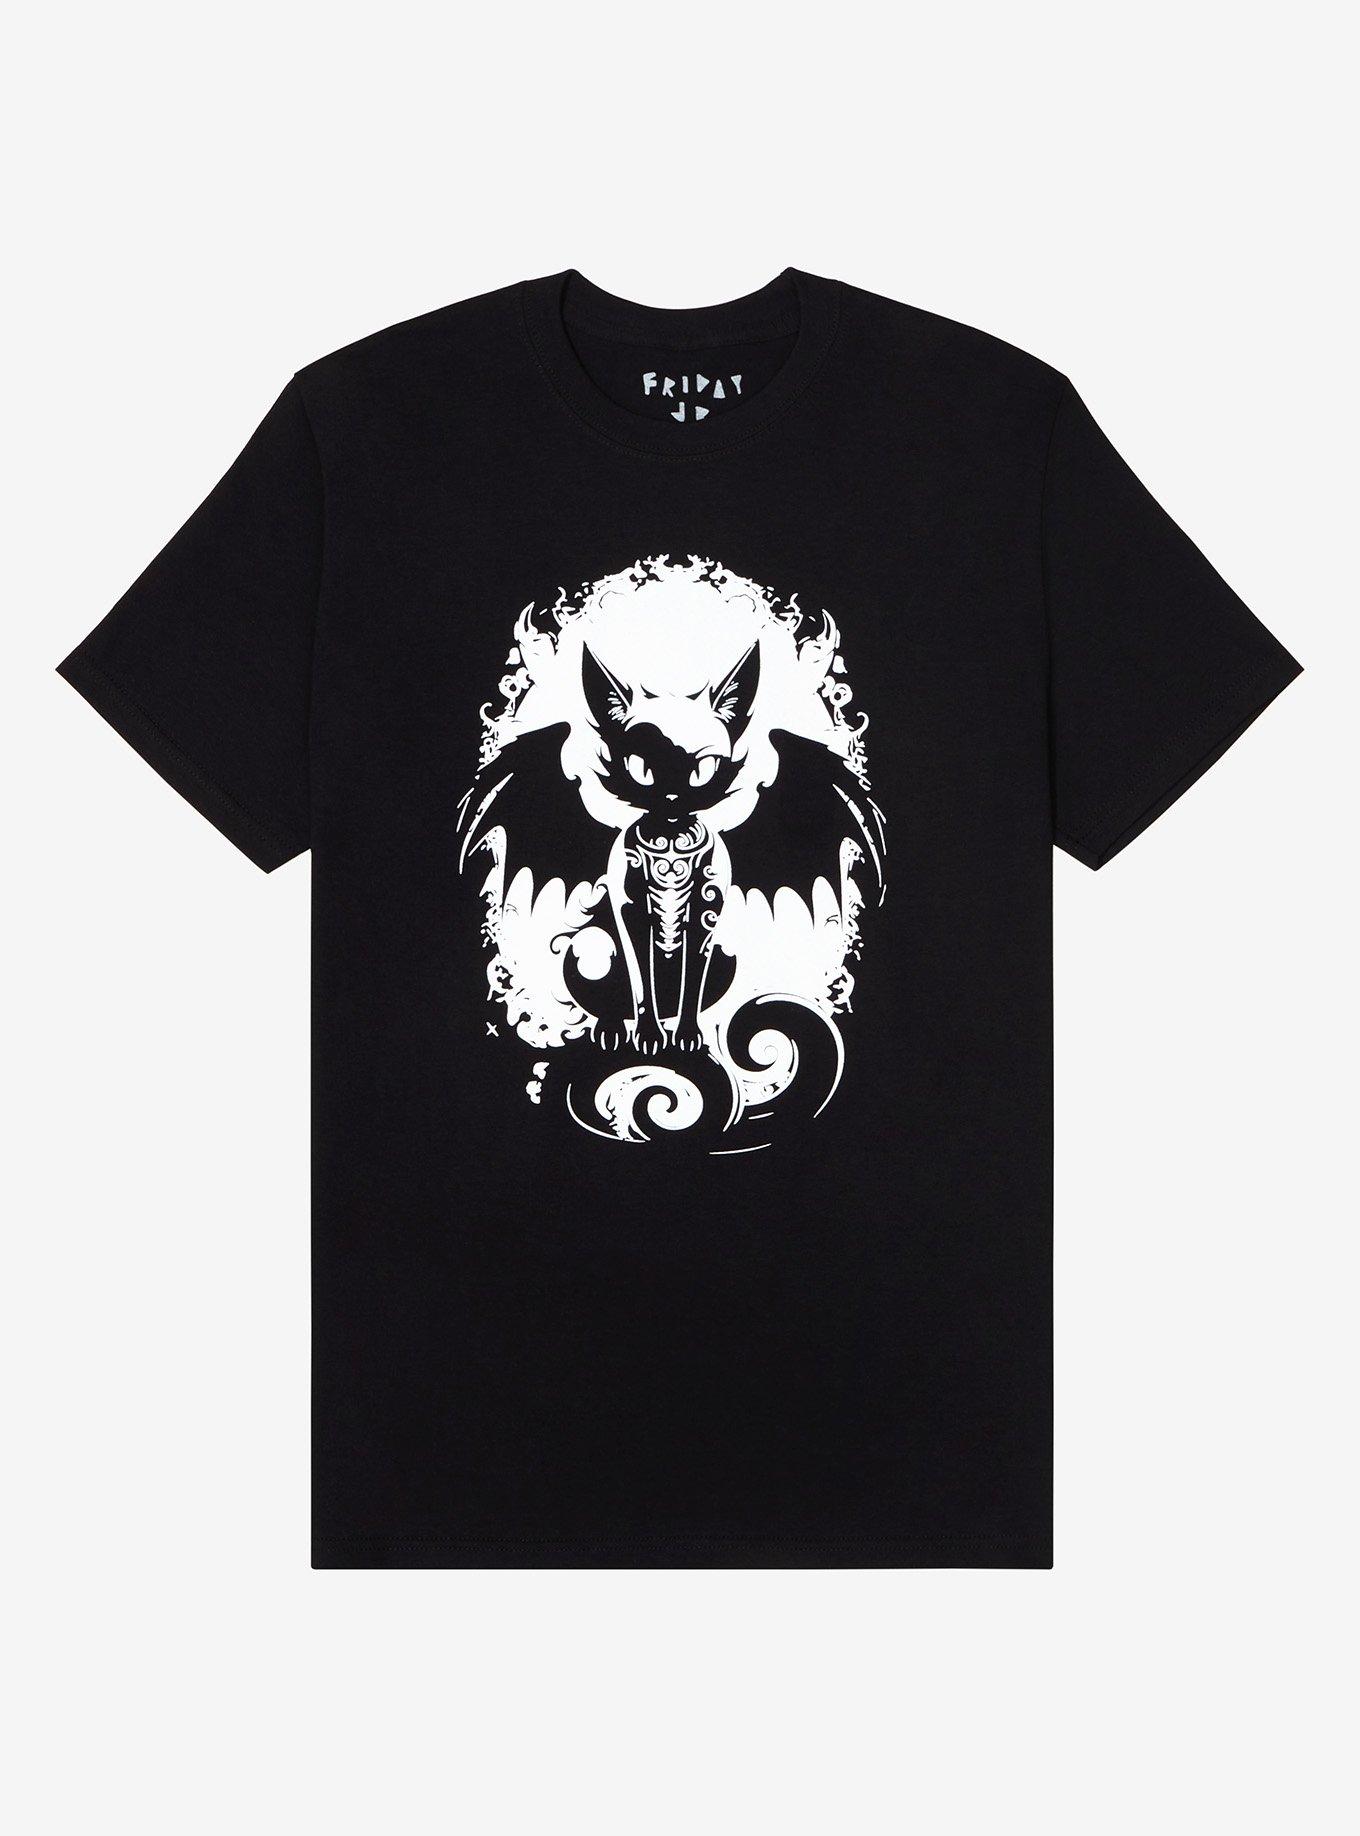 Winged Cat Glow-In-The-Dark T-Shirt By Friday Jr, BLACK, hi-res